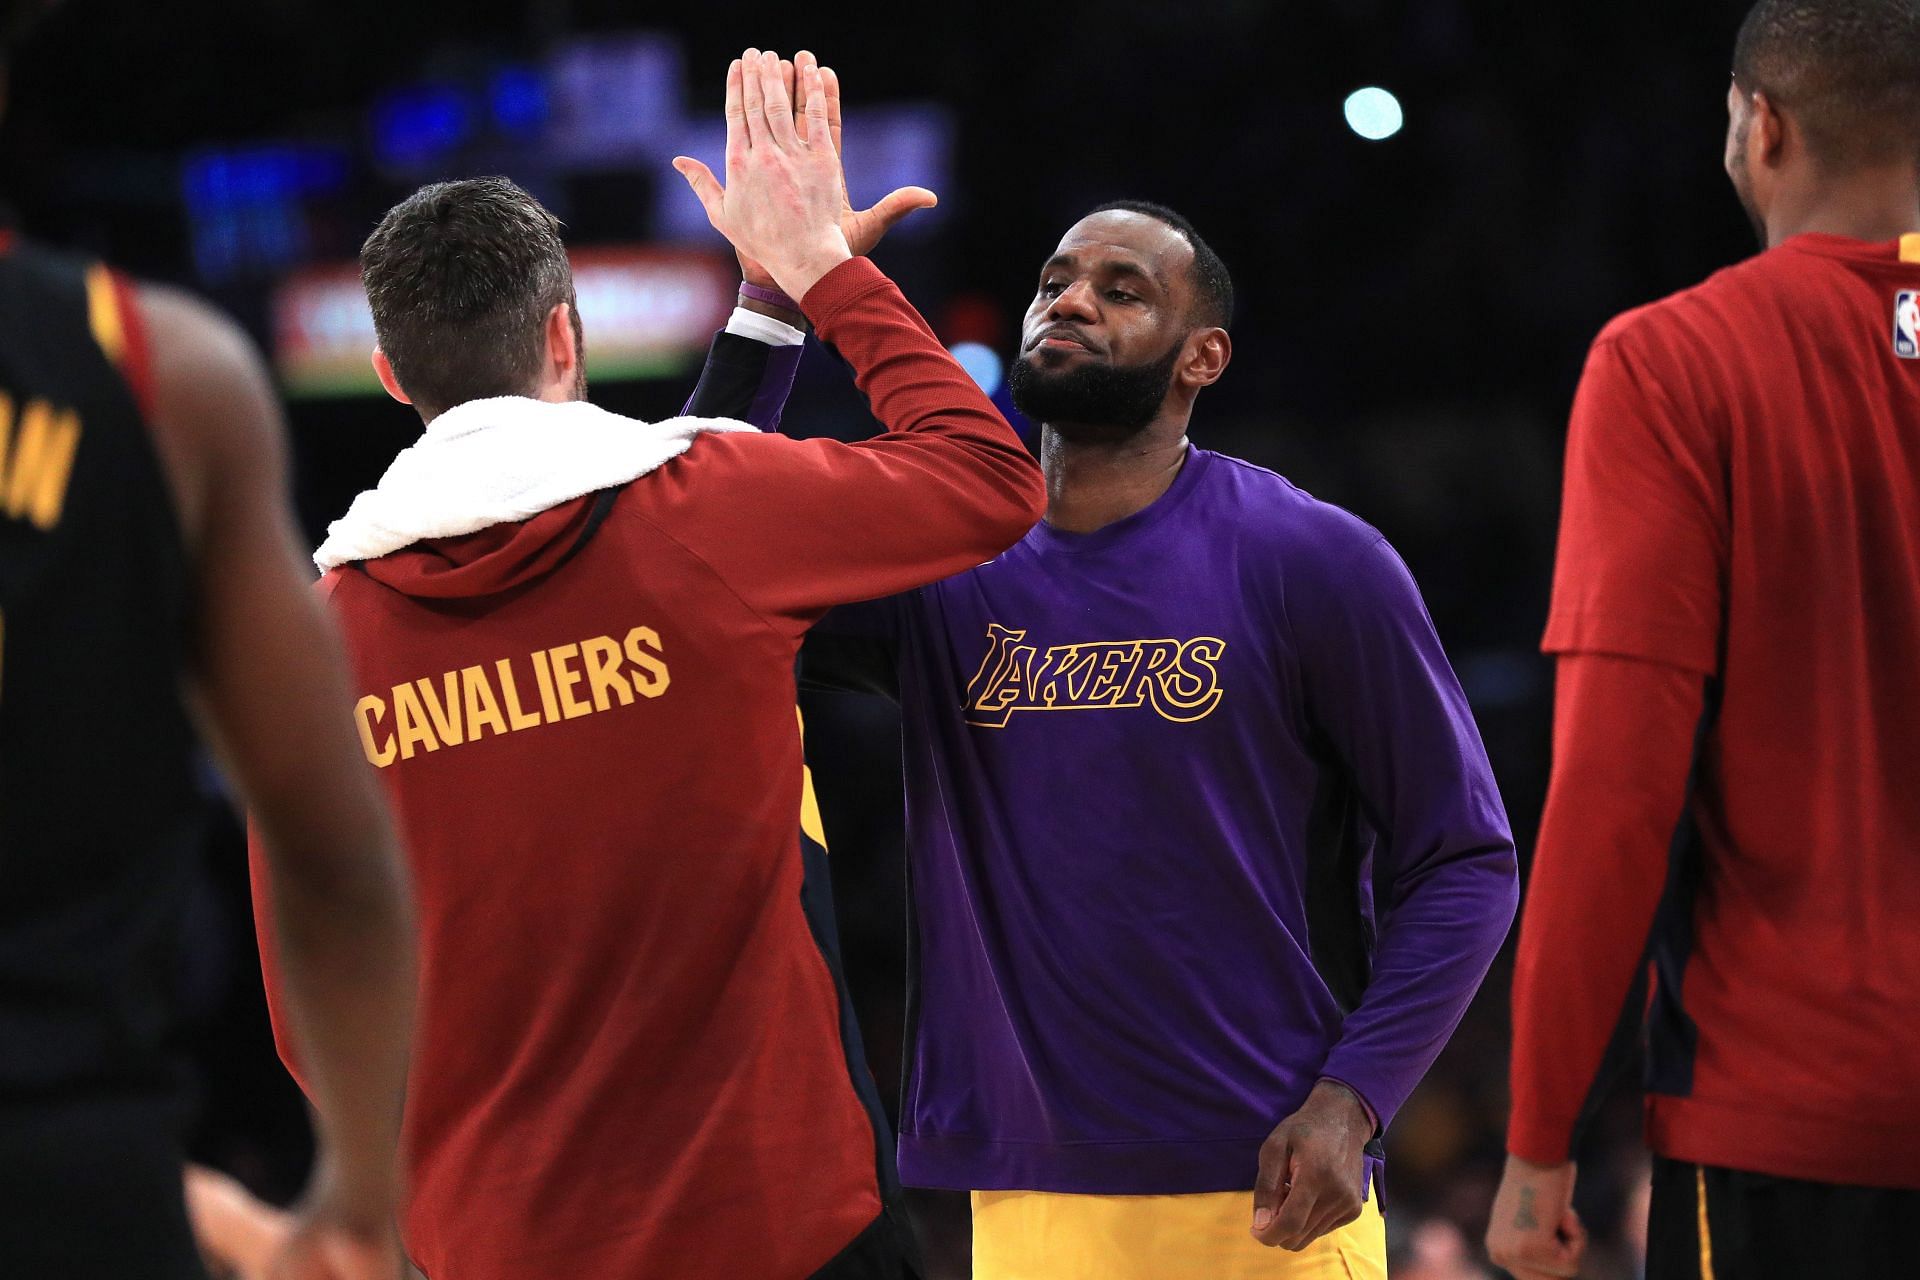 Kevin Love and LeBron James greet each other before a game